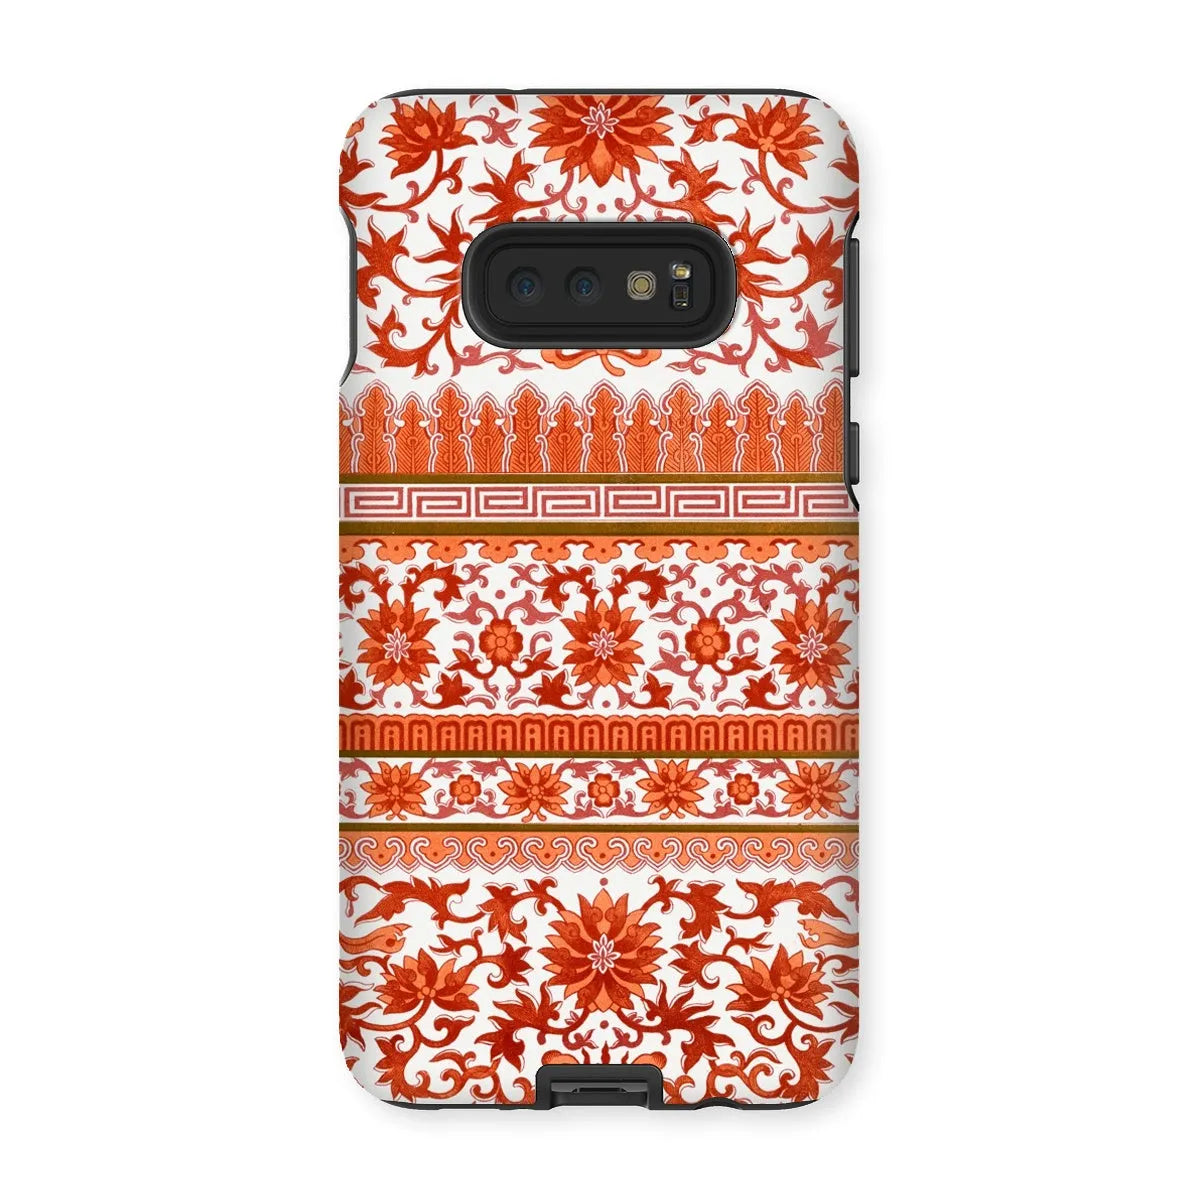 Fiery Chinese Floral Aesthetic Art Phone Case - Owen Jones - Samsung Galaxy S10e / Matte - Mobile Phone Cases